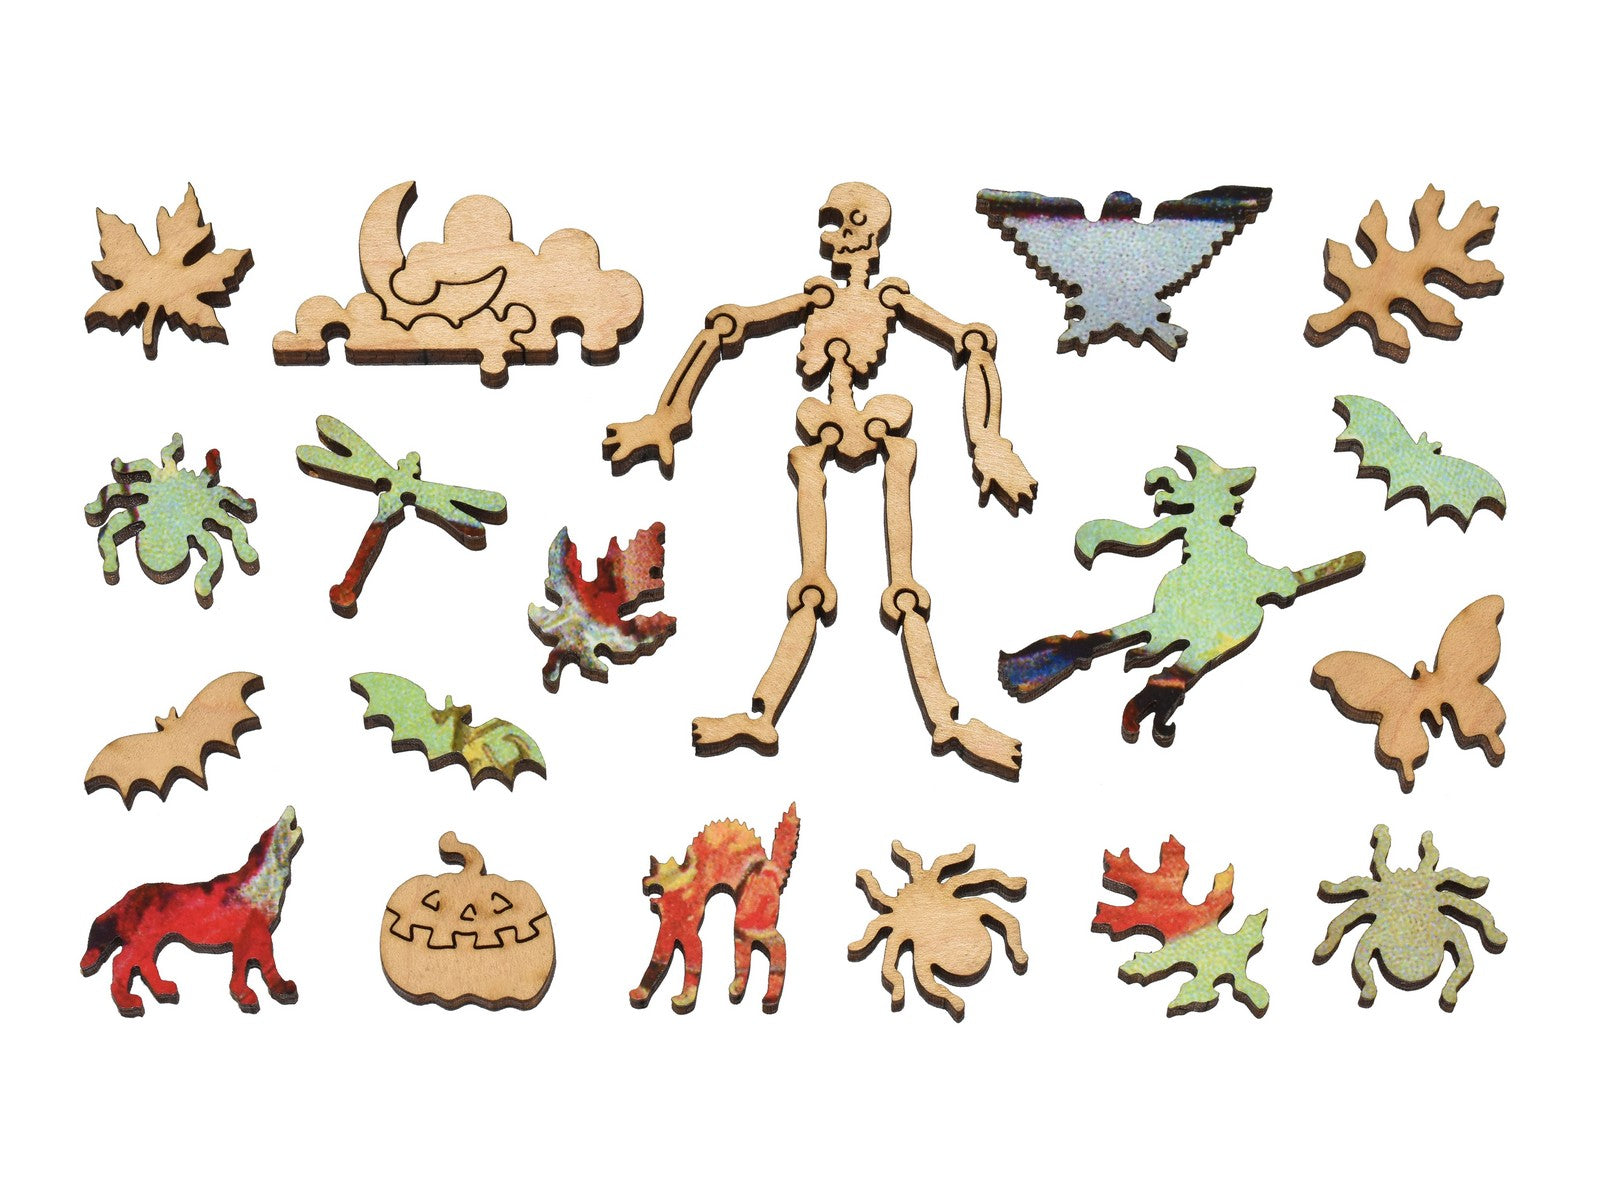 The whimsy pieces that can be found in the puzzle, Happy Halloween.